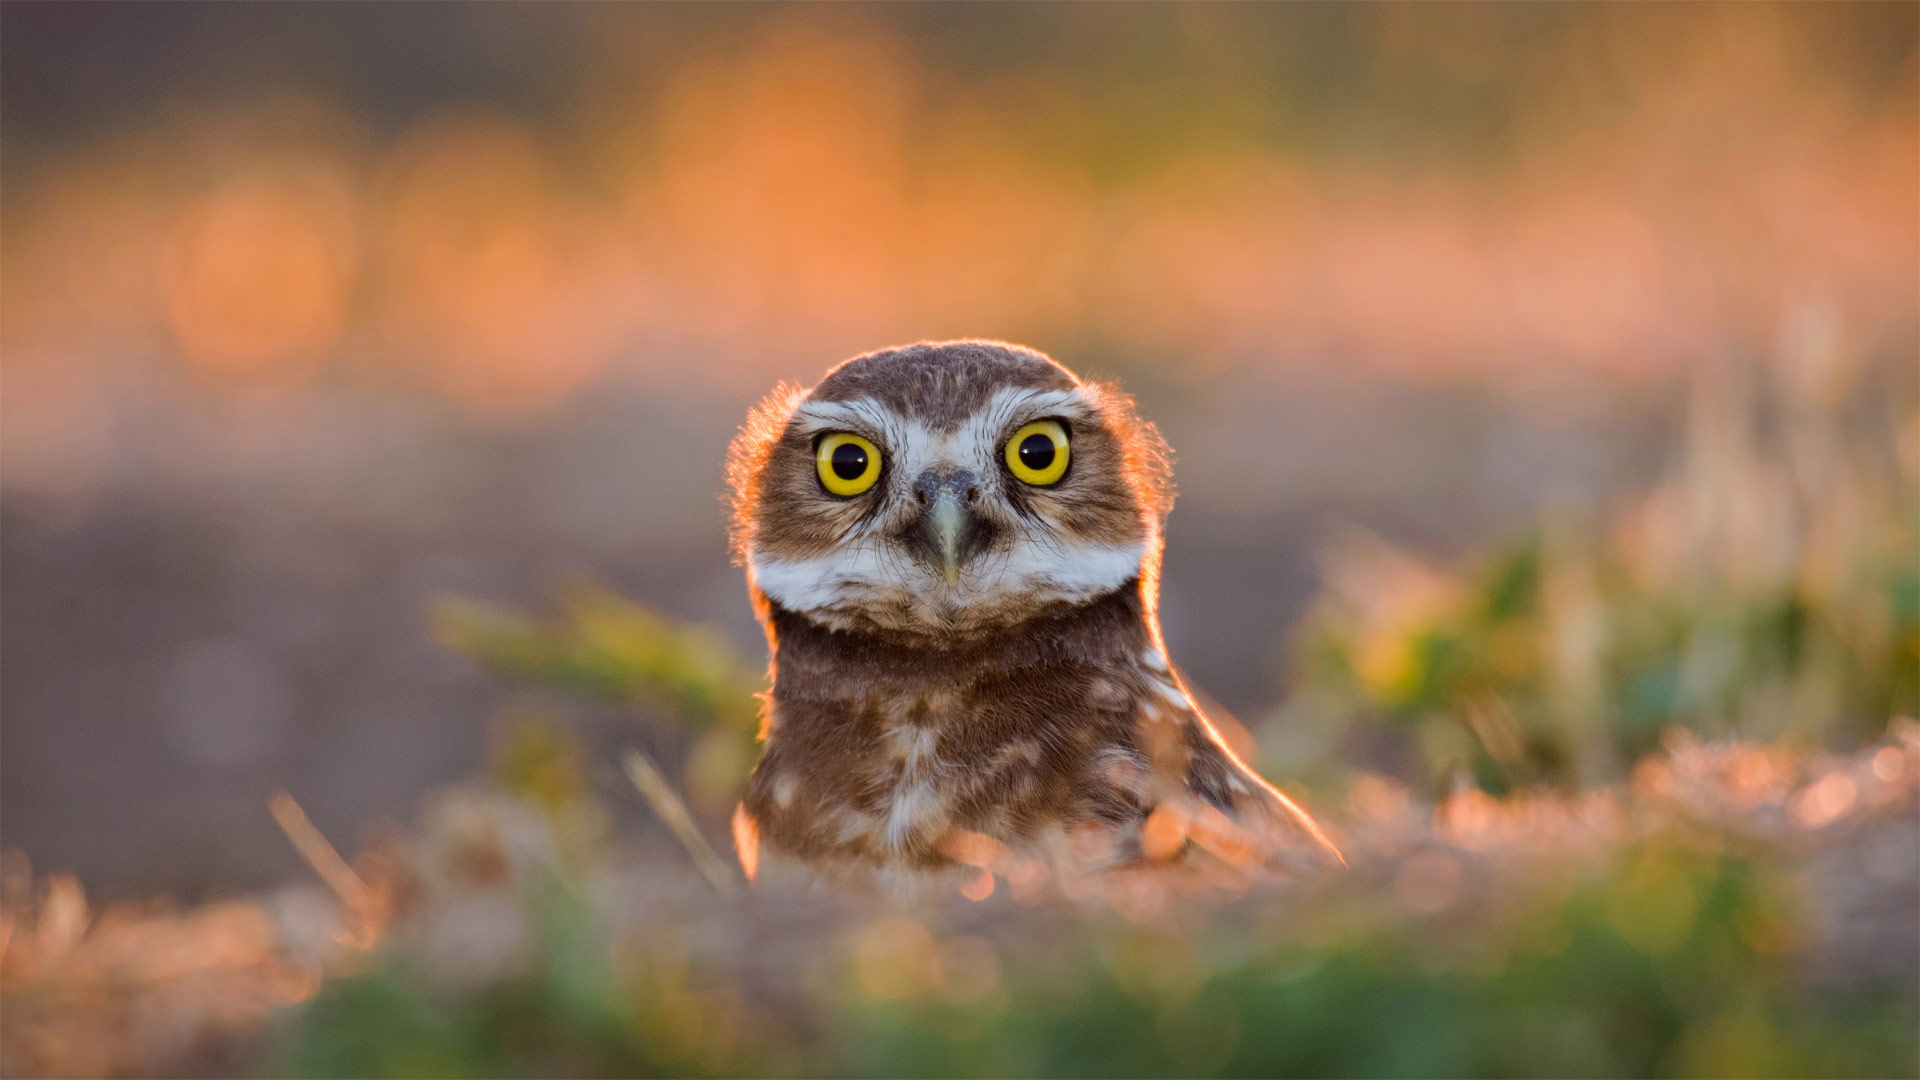 An adult burrowing owl emerges from its burrow at sunset in Davis, California - Neil Losin/Tandem Stills + Motion)